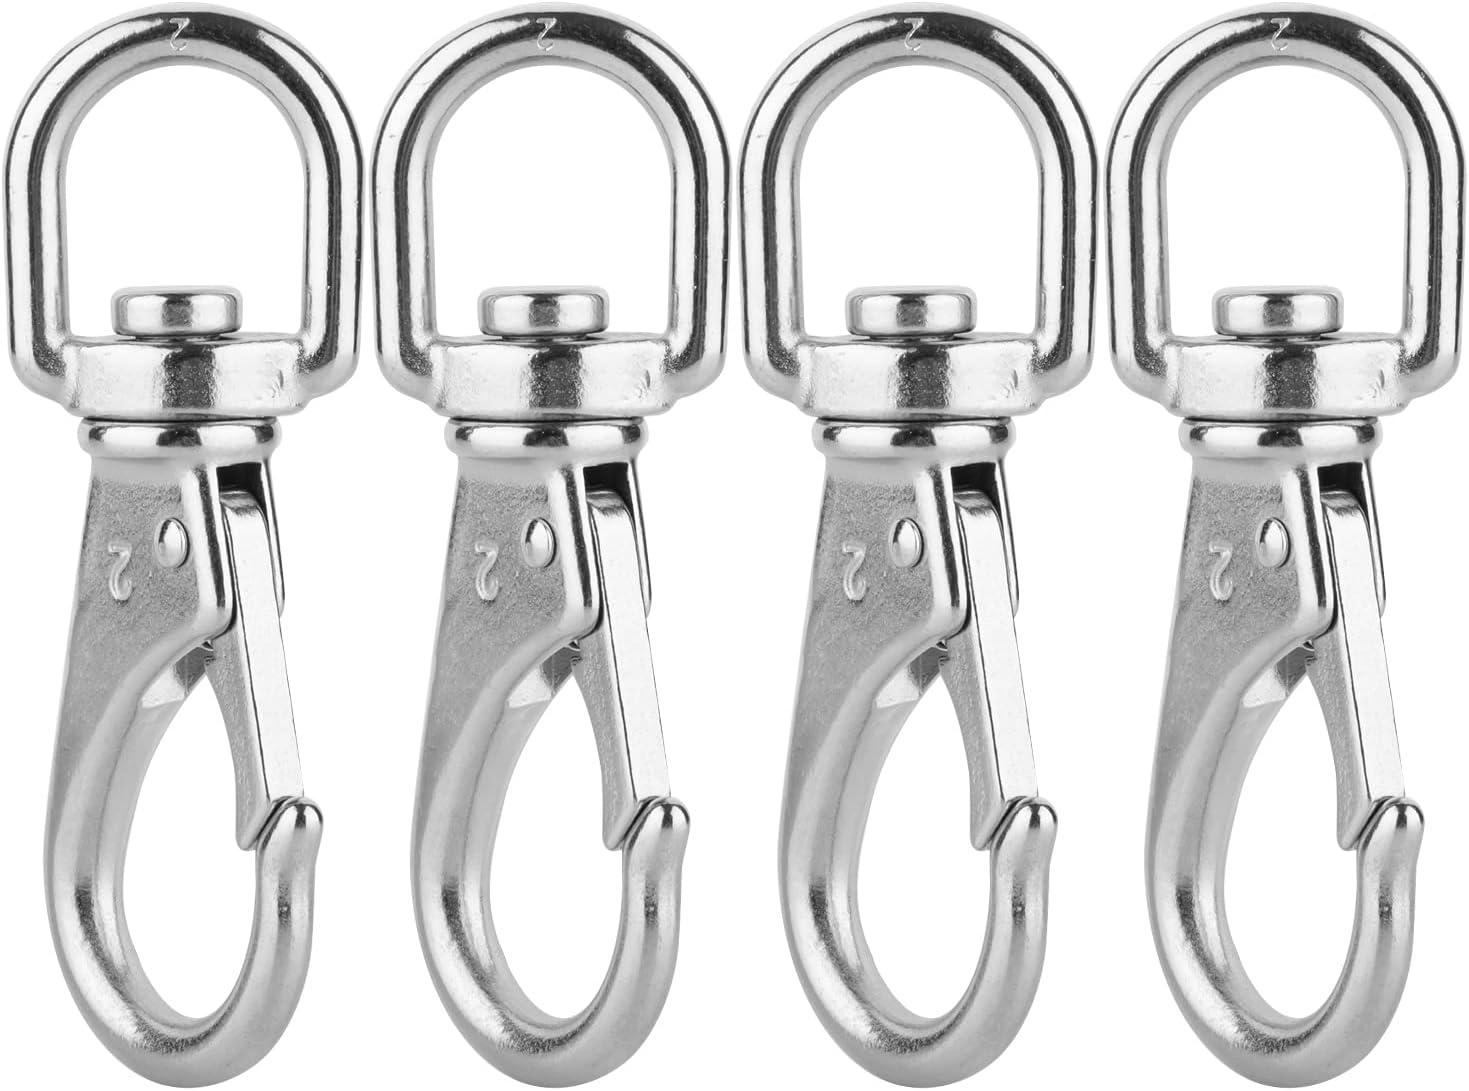  Mixiflor Stainless Steel Swivel Eye Snap Hook, 4 Pack (4 Inch)  Swivel Snap Hook Flag Pole Clips, Rotating Diving Clips Spring Hooks for  Flag Poles, Dog Leash, Key Chain, Boat Anchor